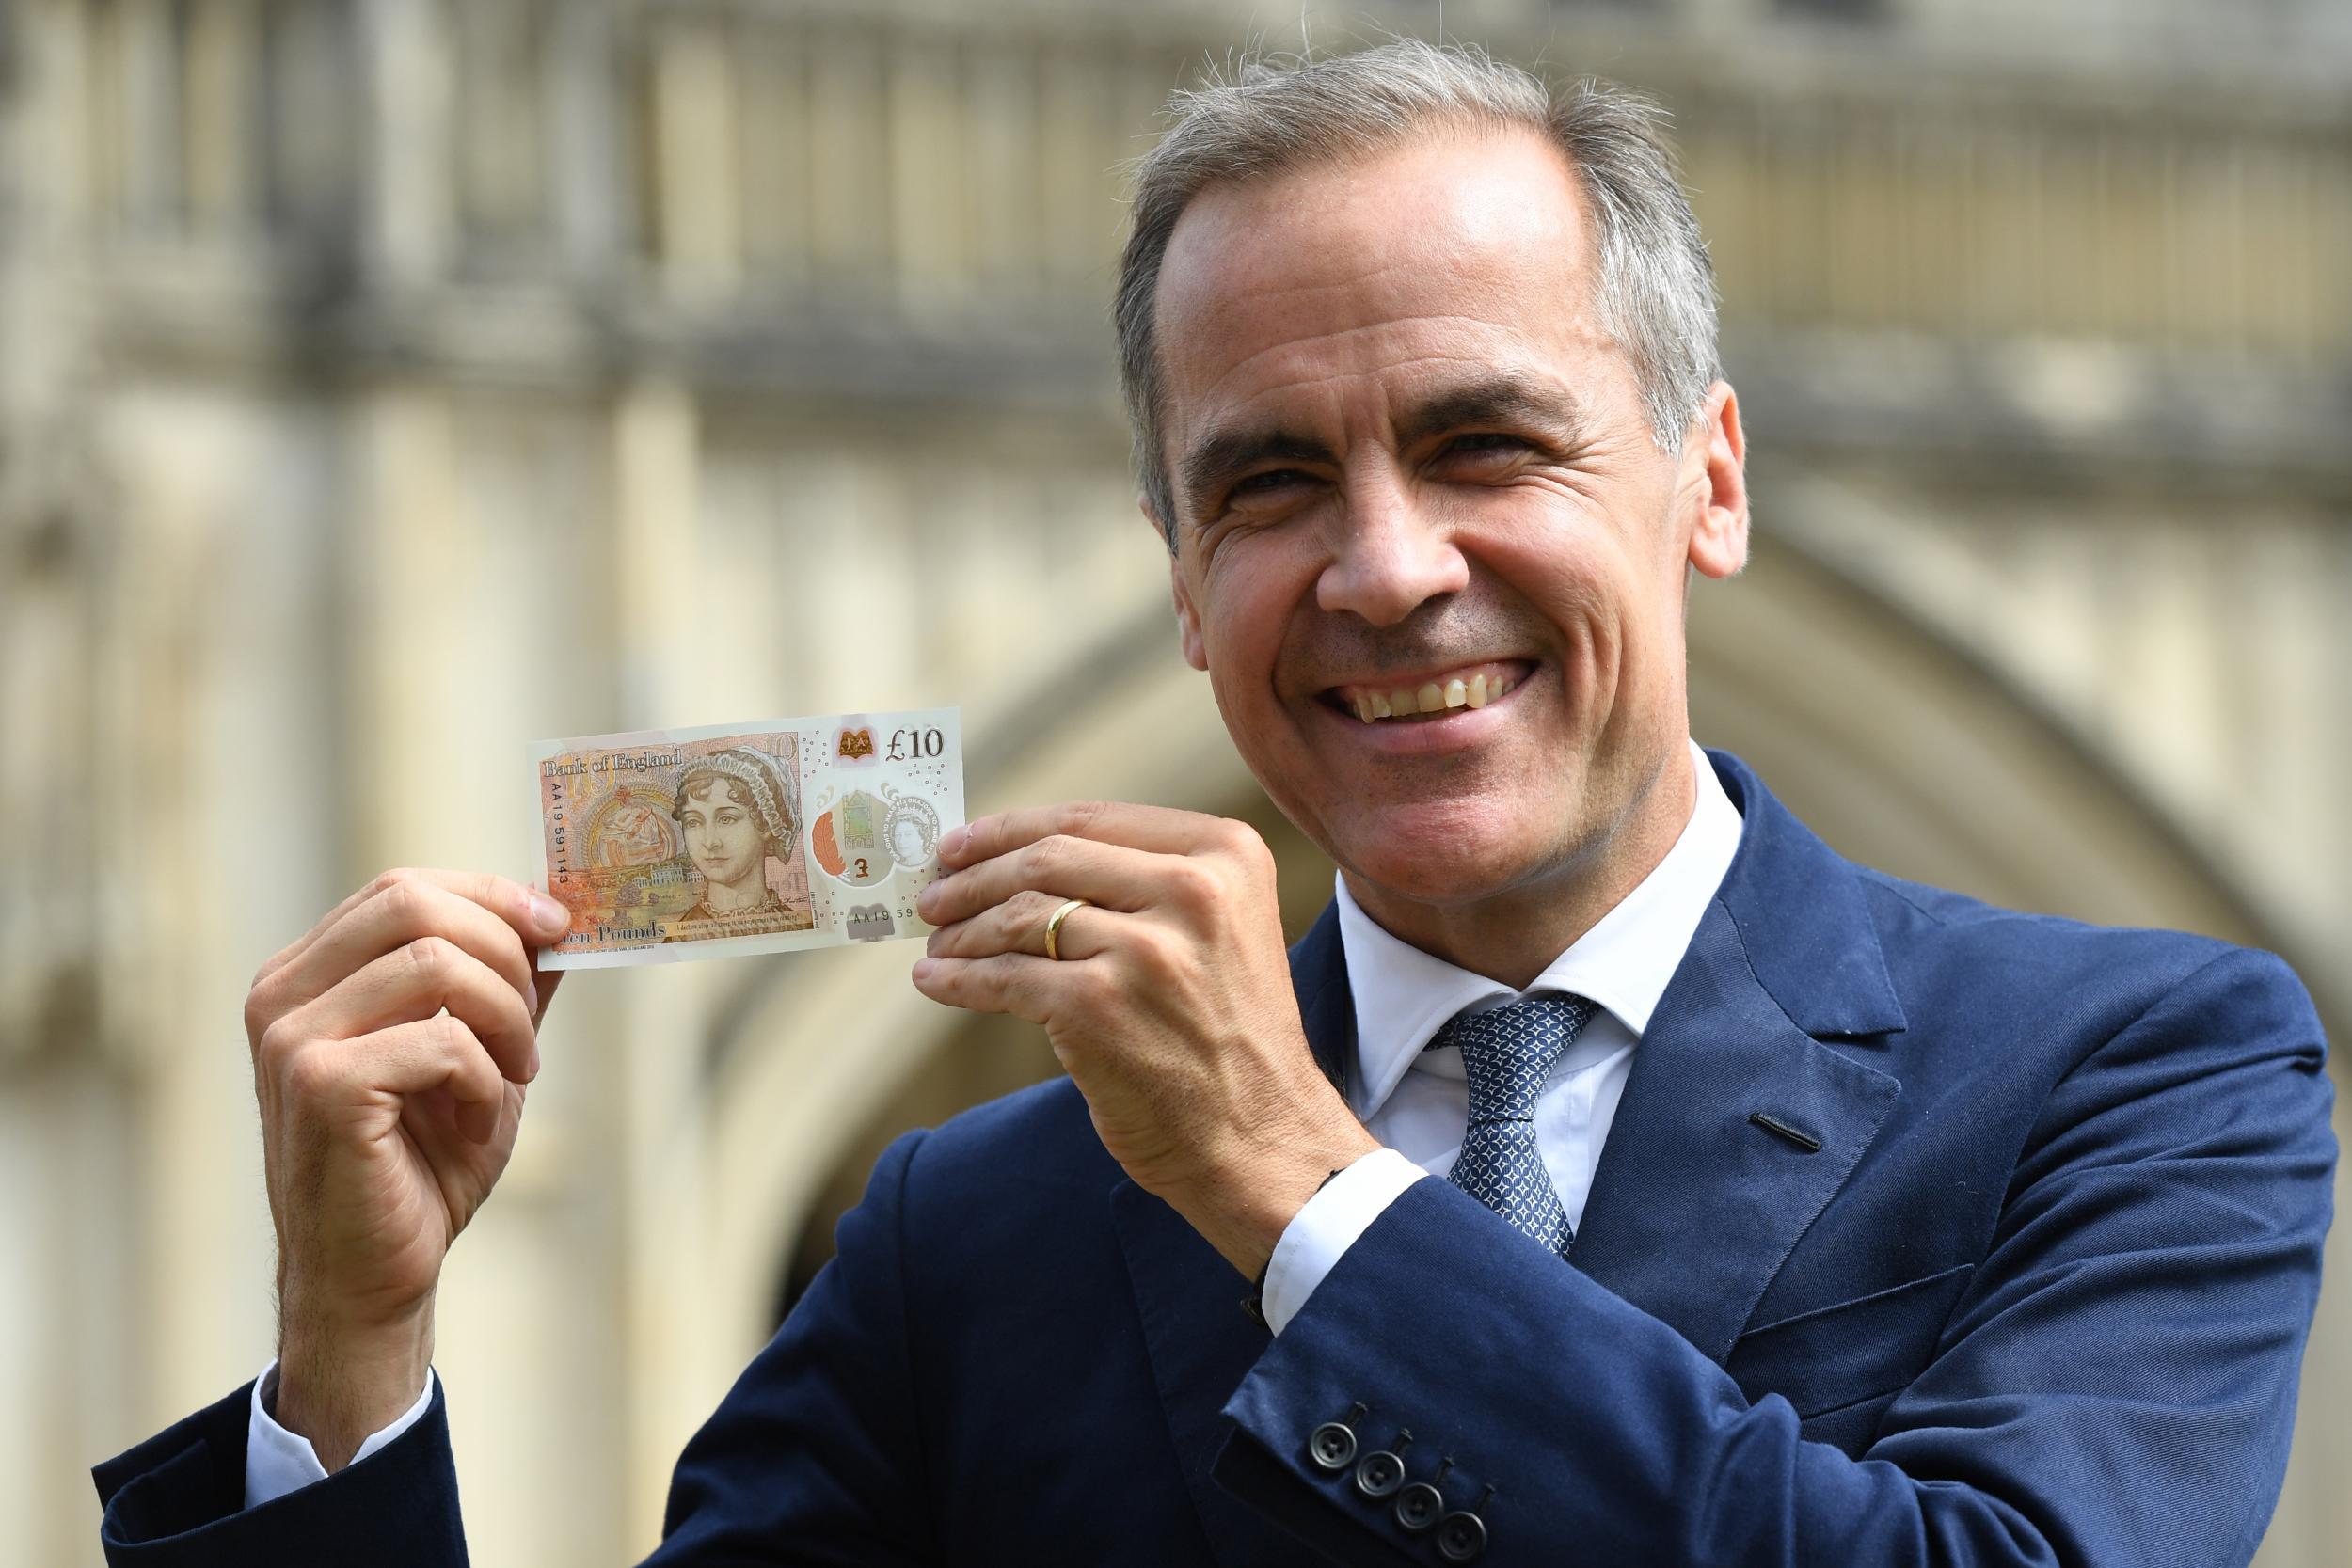 Governor of the Bank of England Mark Carney brandishing the new note